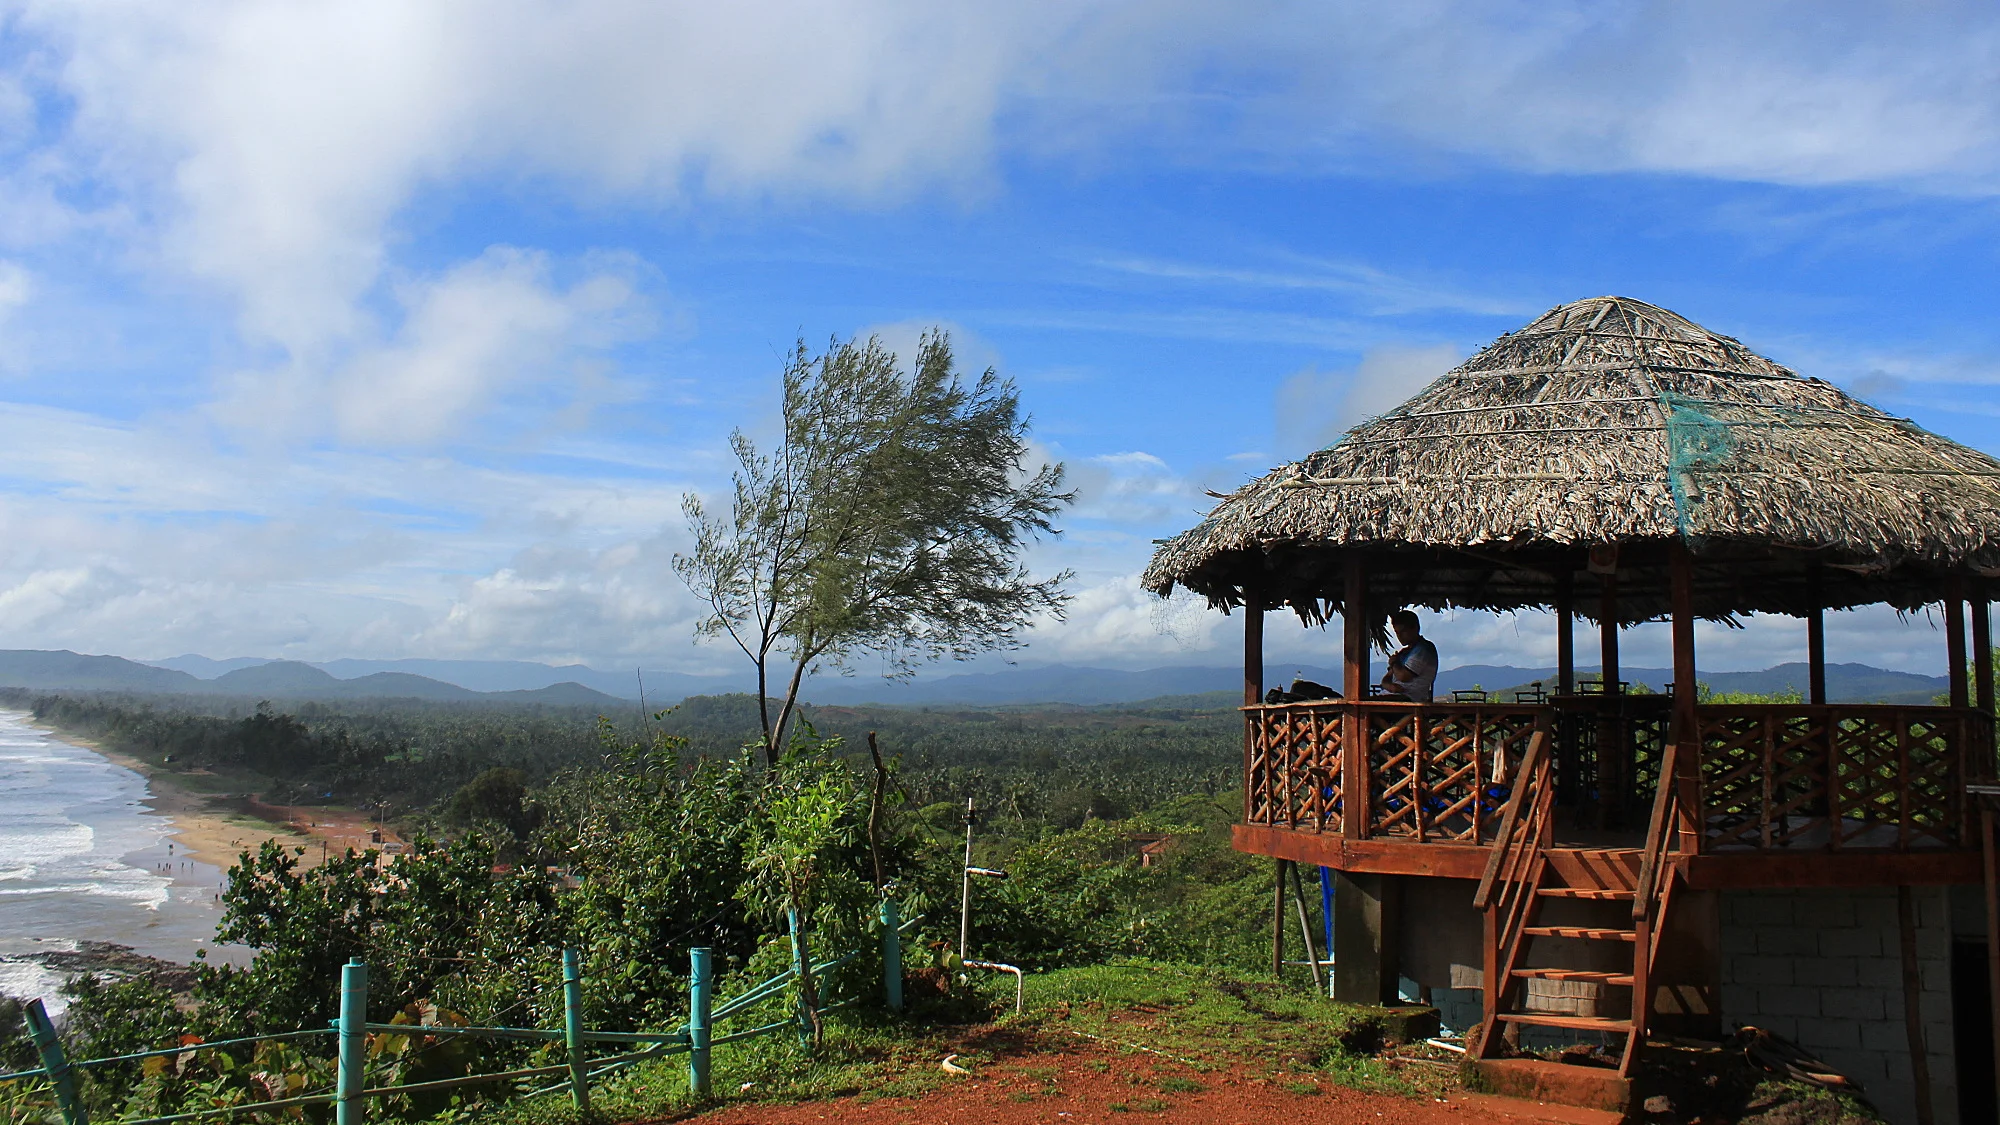 The yard of Zostel Gokarna with blue sky and a viewpoint restaurant hut on the hill.